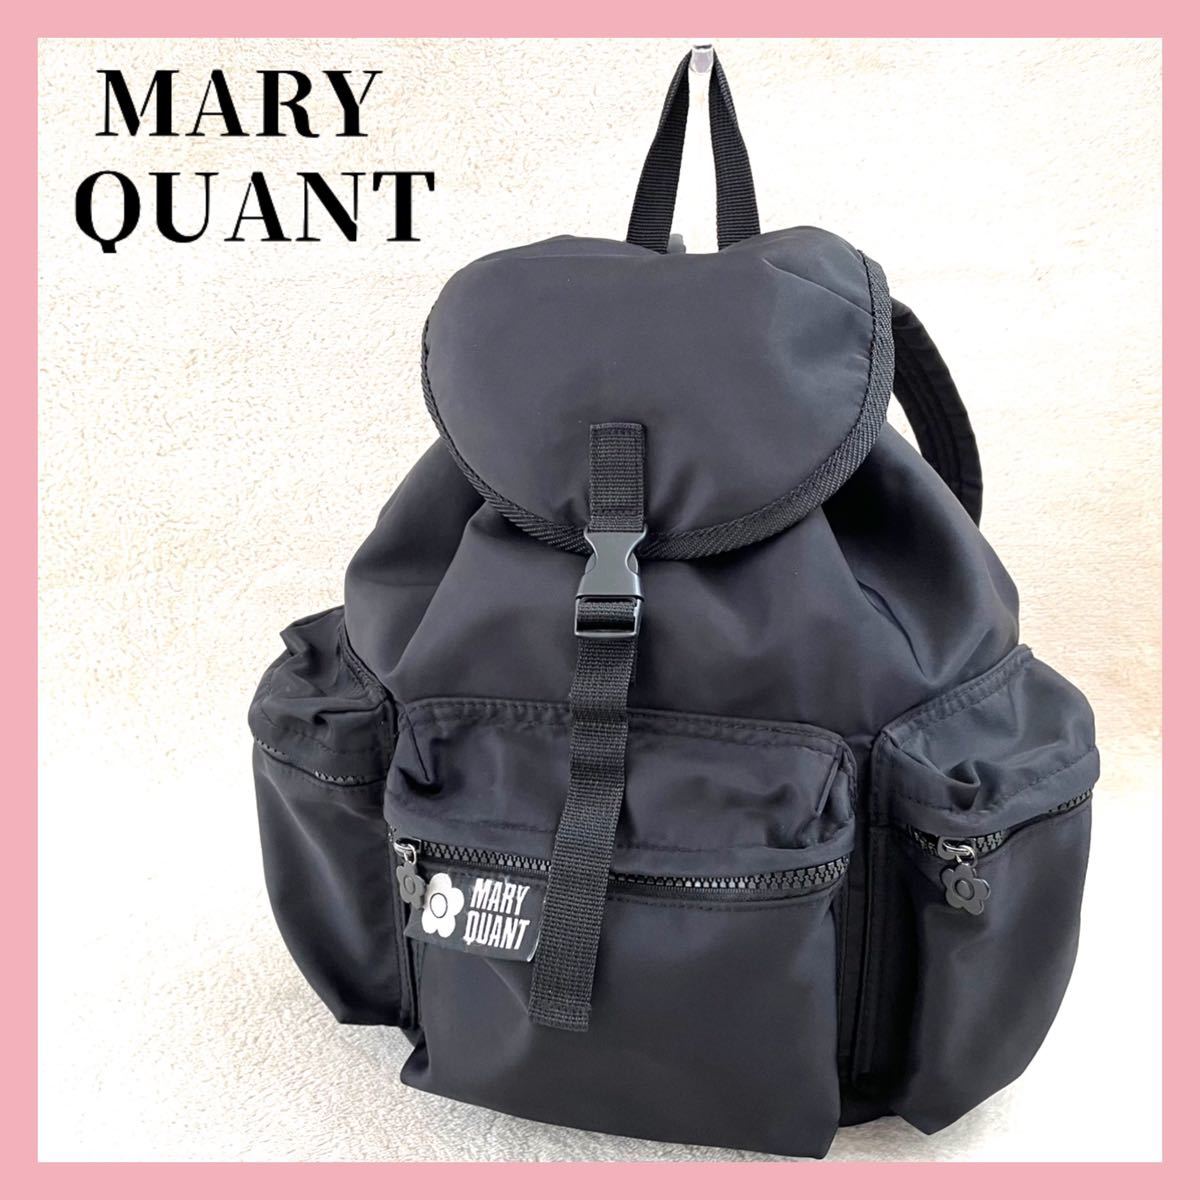 MARY QUANT マリークワント　リュック　リュックサック　バッグ　ブラック